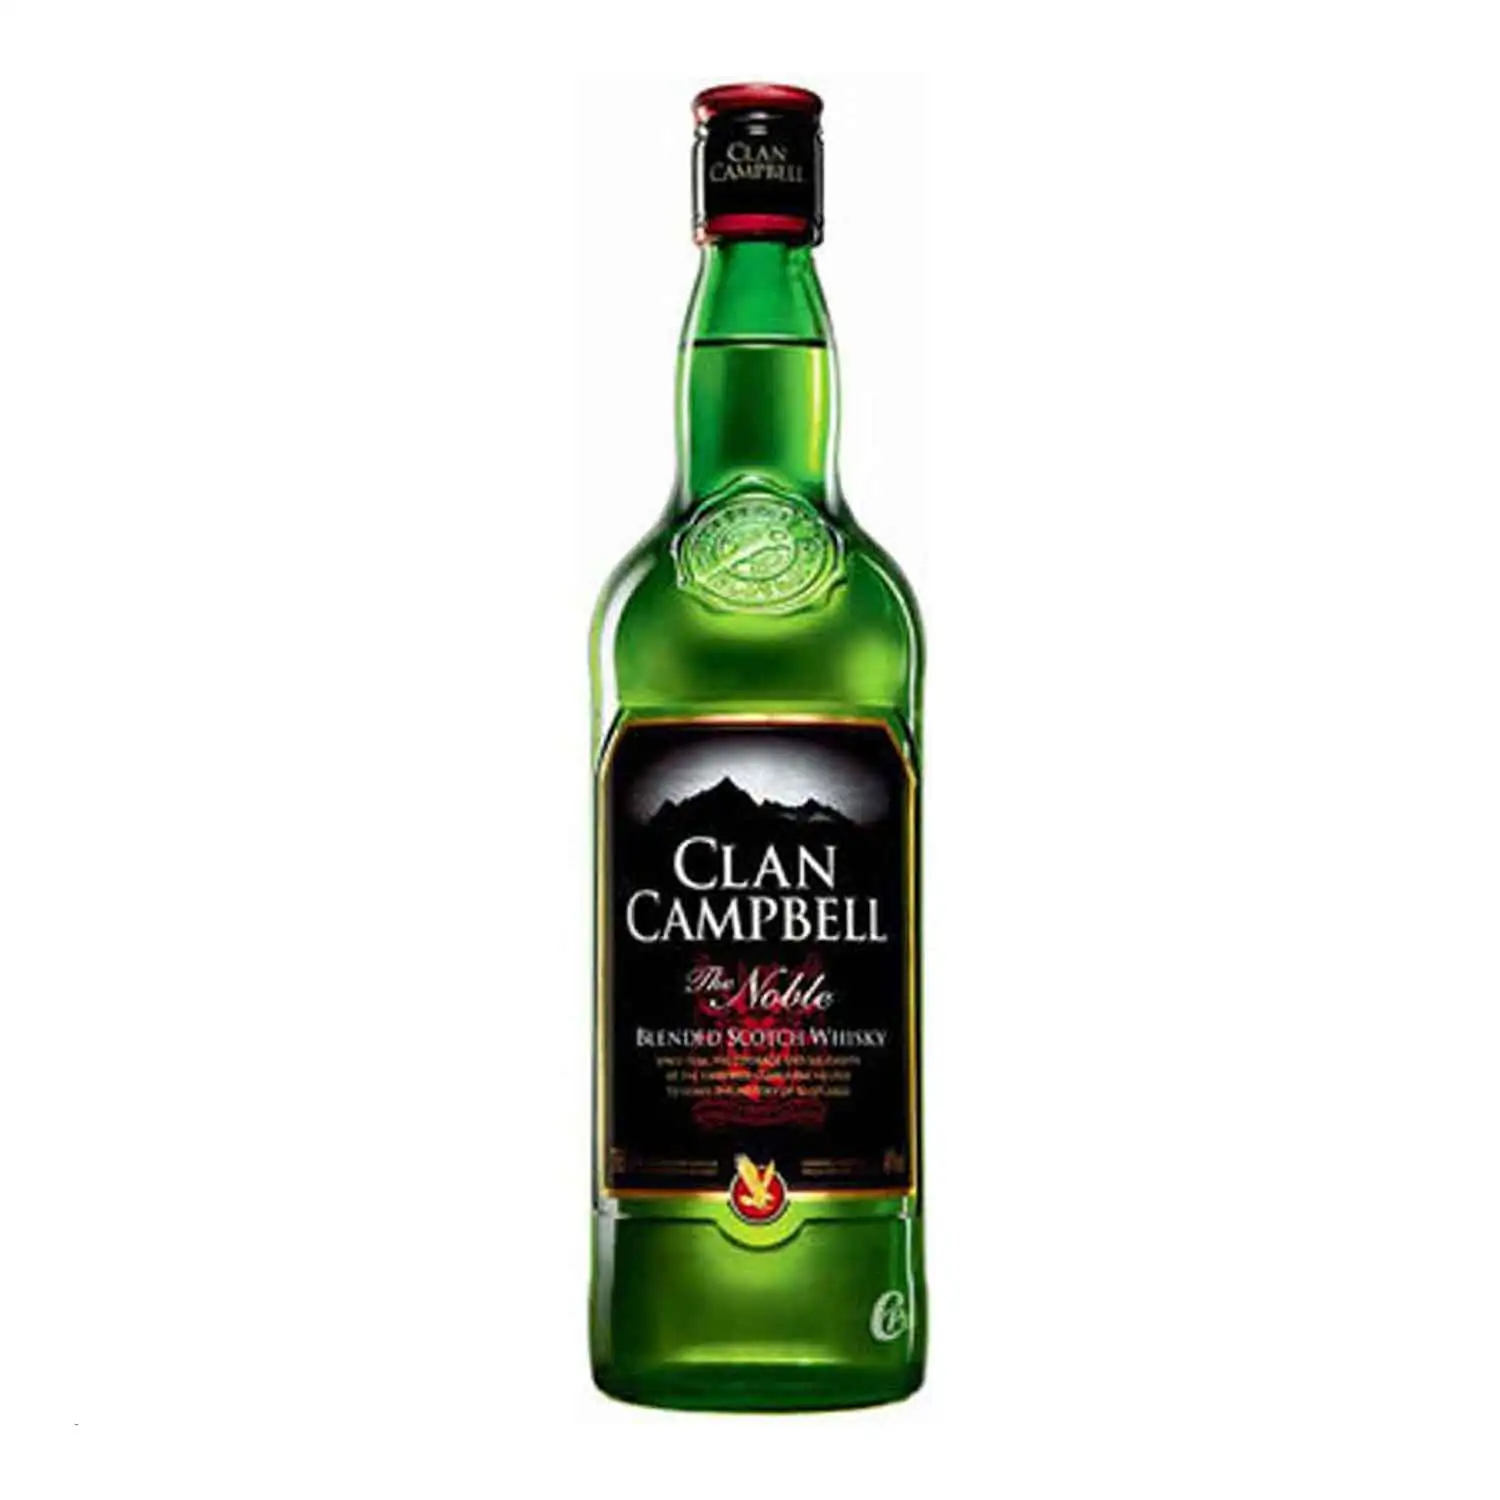 Clan Campbell 70cl Alc 40% - Buy at Real Tobacco